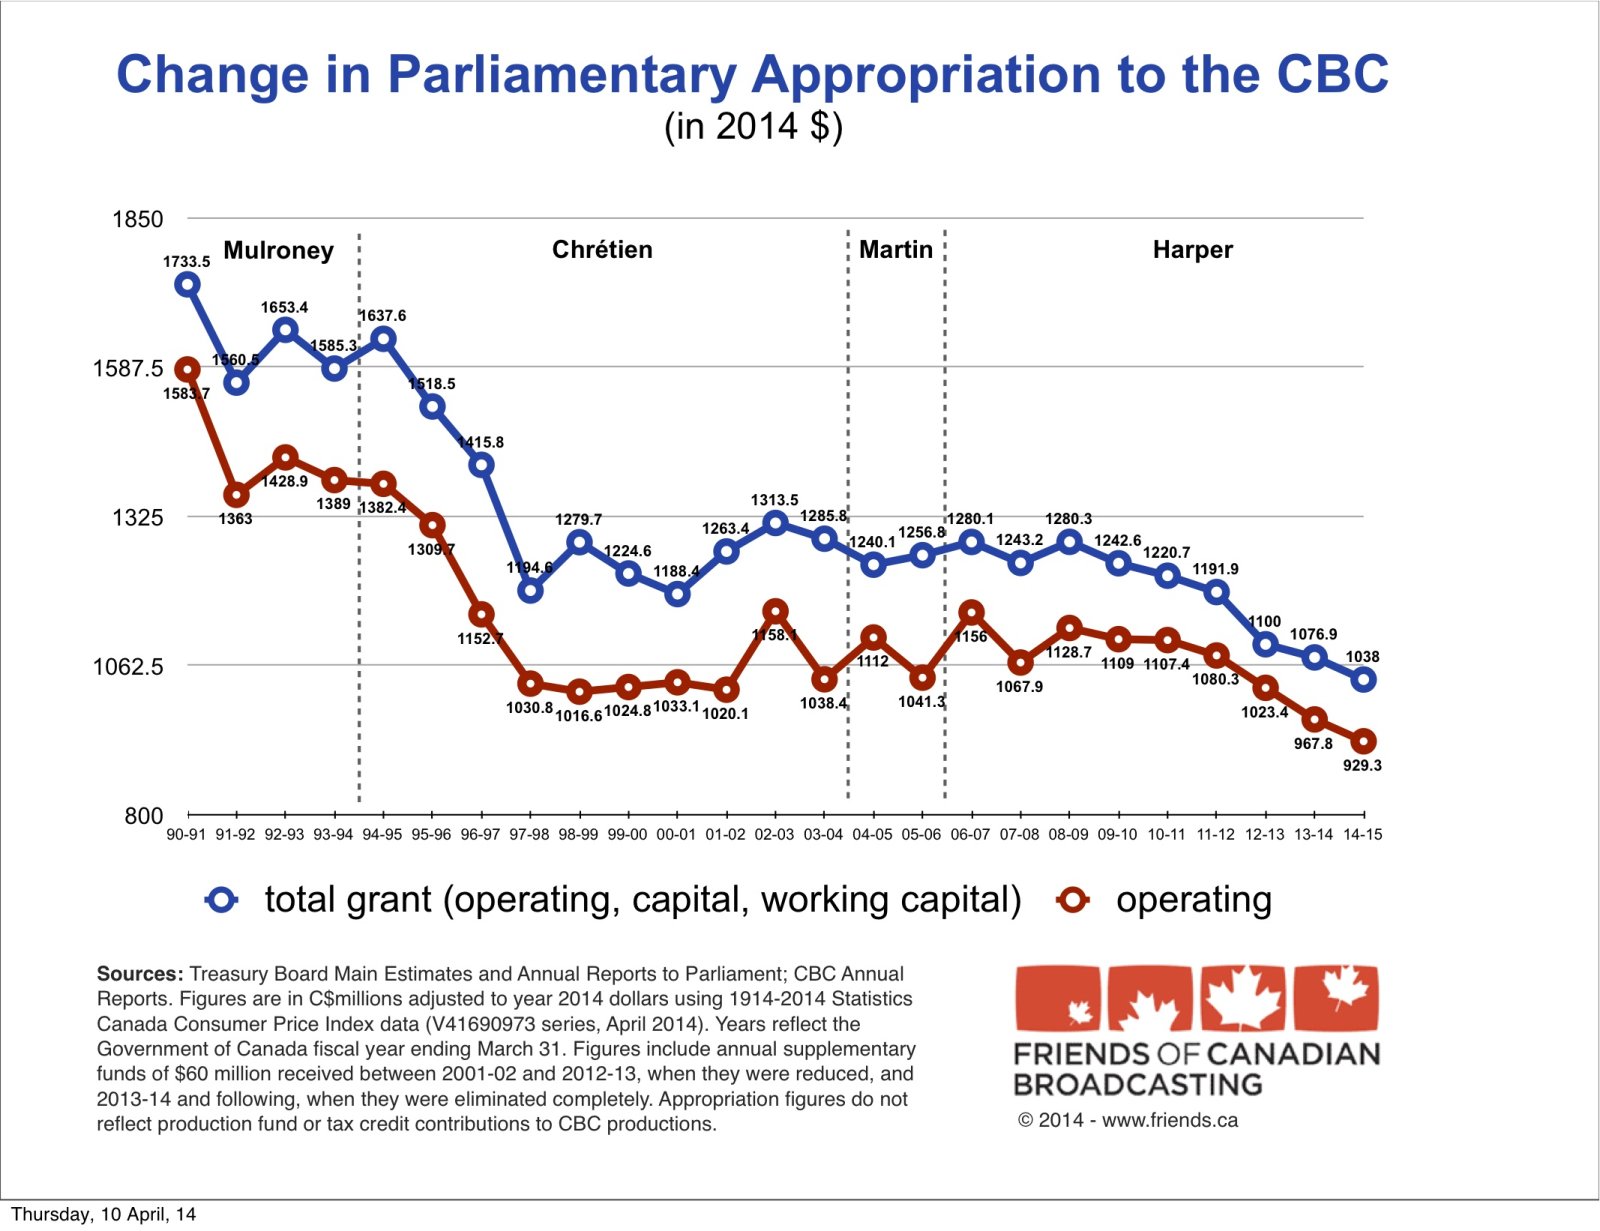 Declining CBC funding over 1990-2014